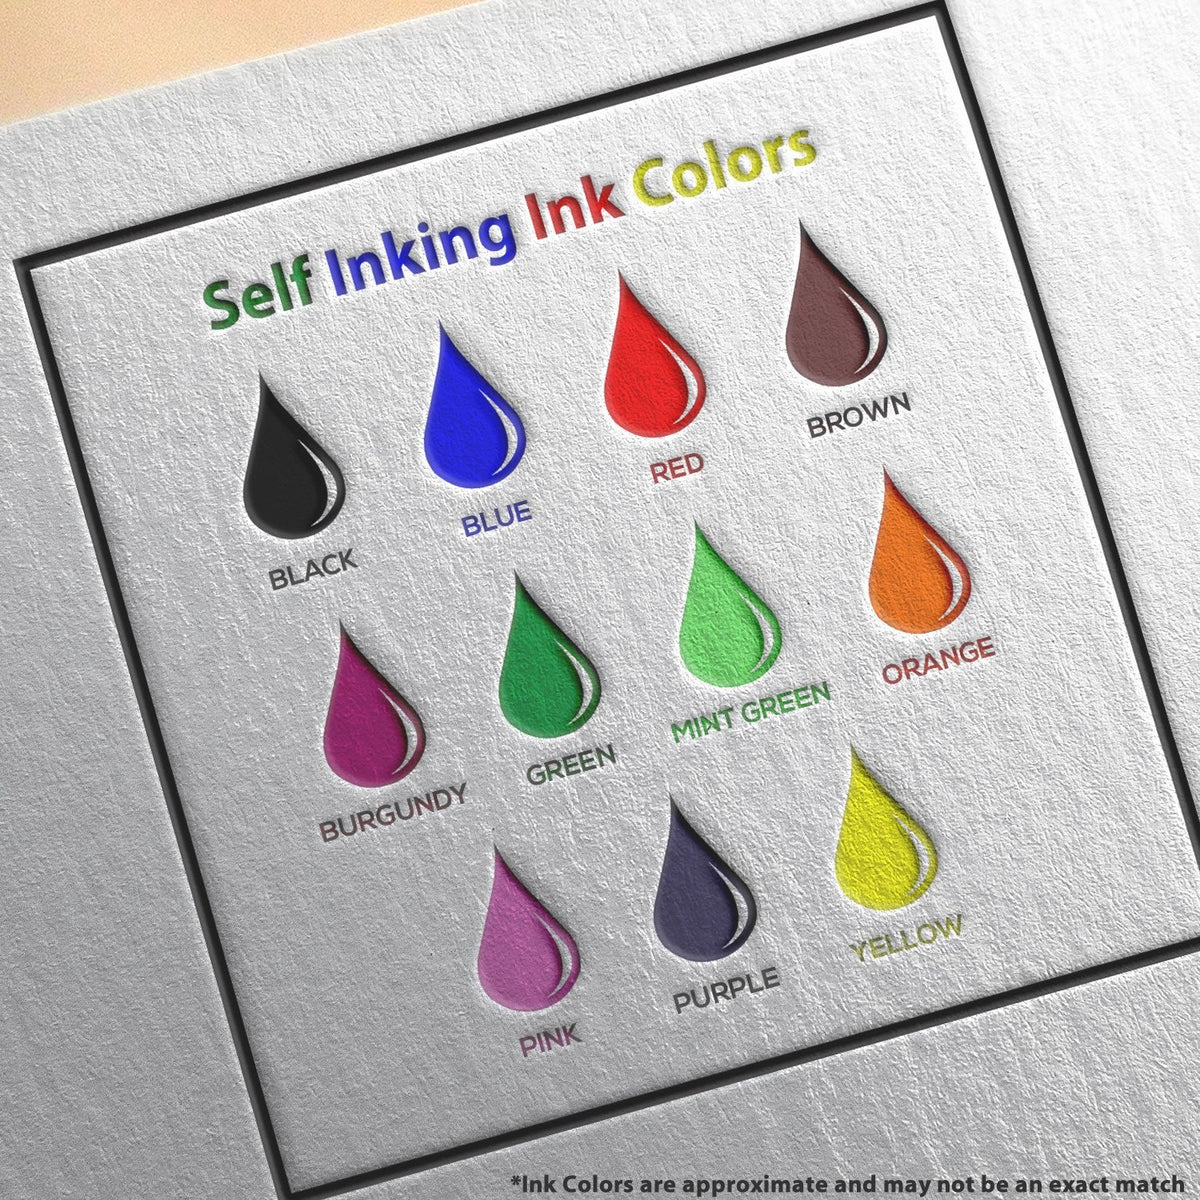 Self-Inking Round Parent Signature Required Stamp Ink Color Options